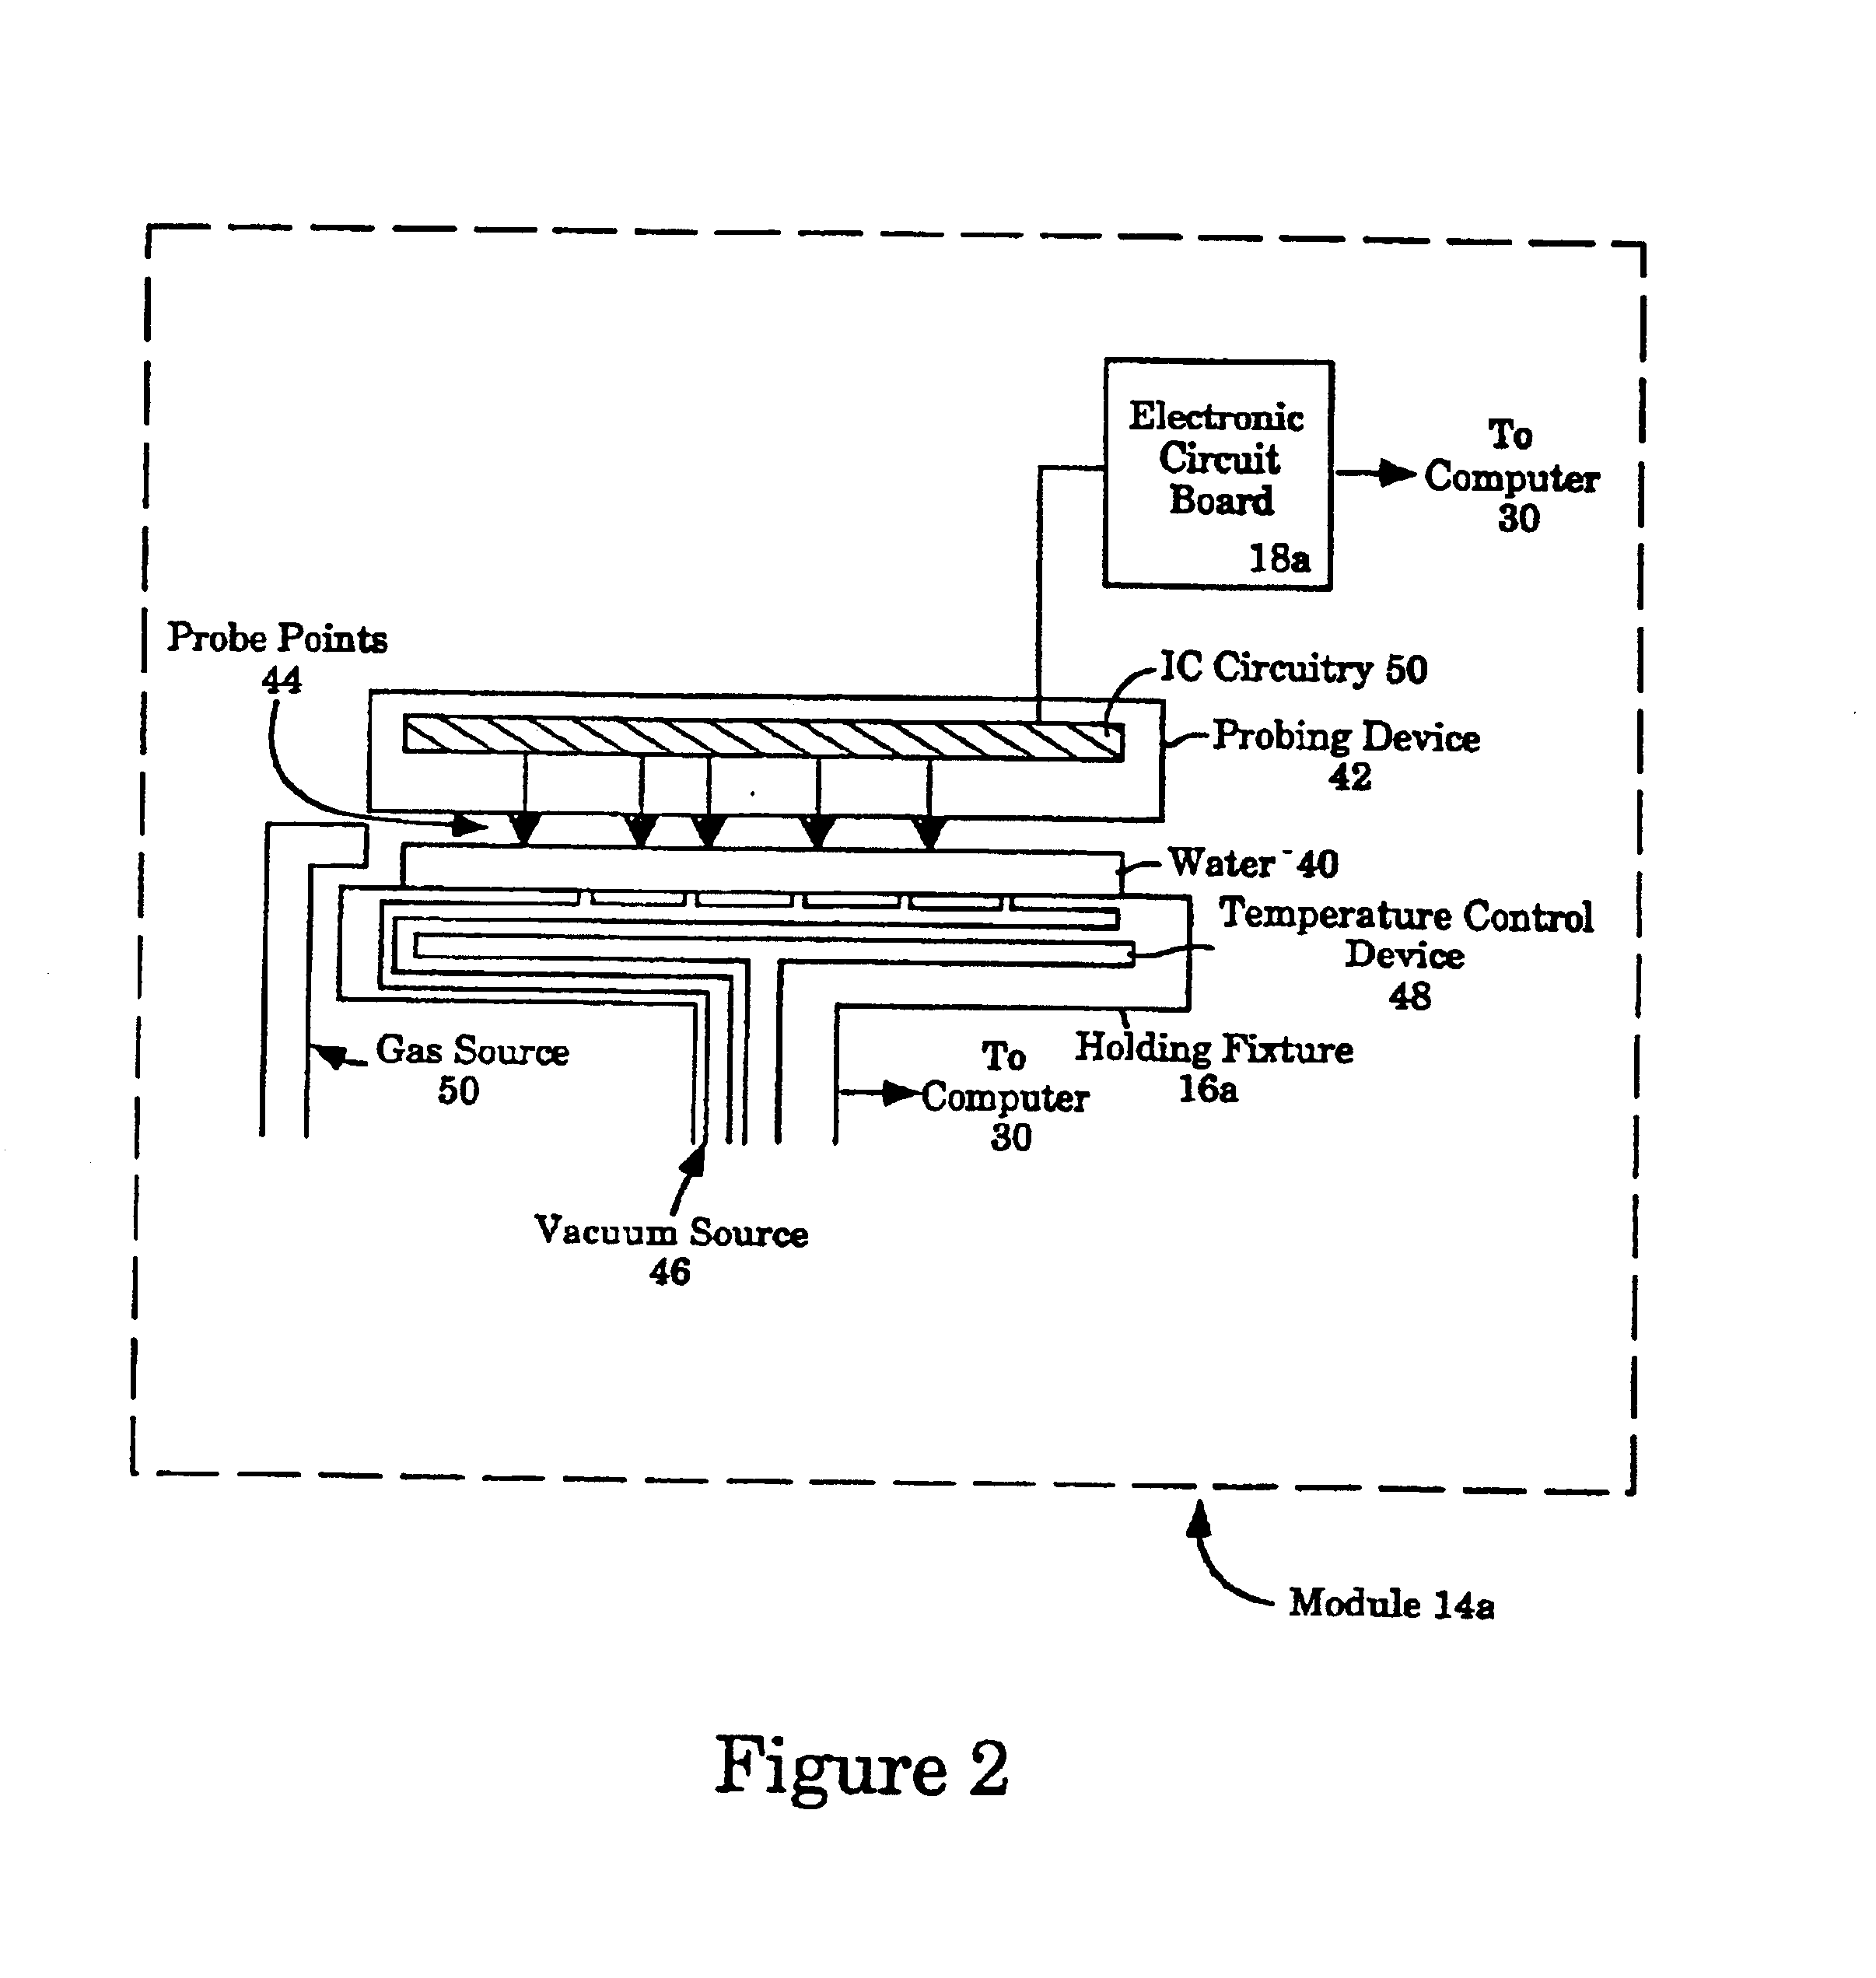 Method and system for probing, testing, burn-in, repairing and programming of integrated circuits in a closed environment using a single apparatus